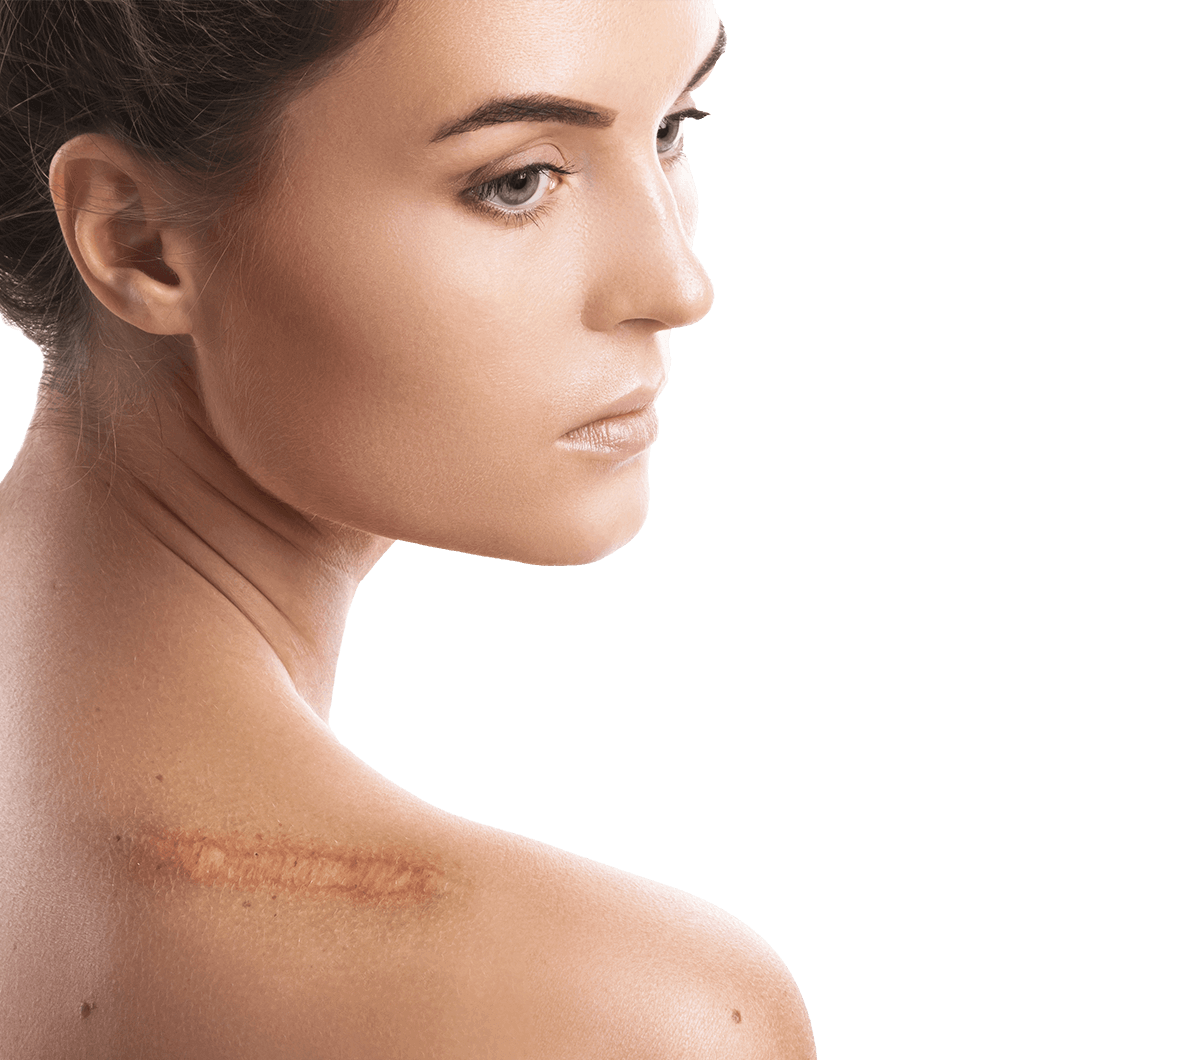 young-woman-with-shoulder-scar-looking-sad-altered